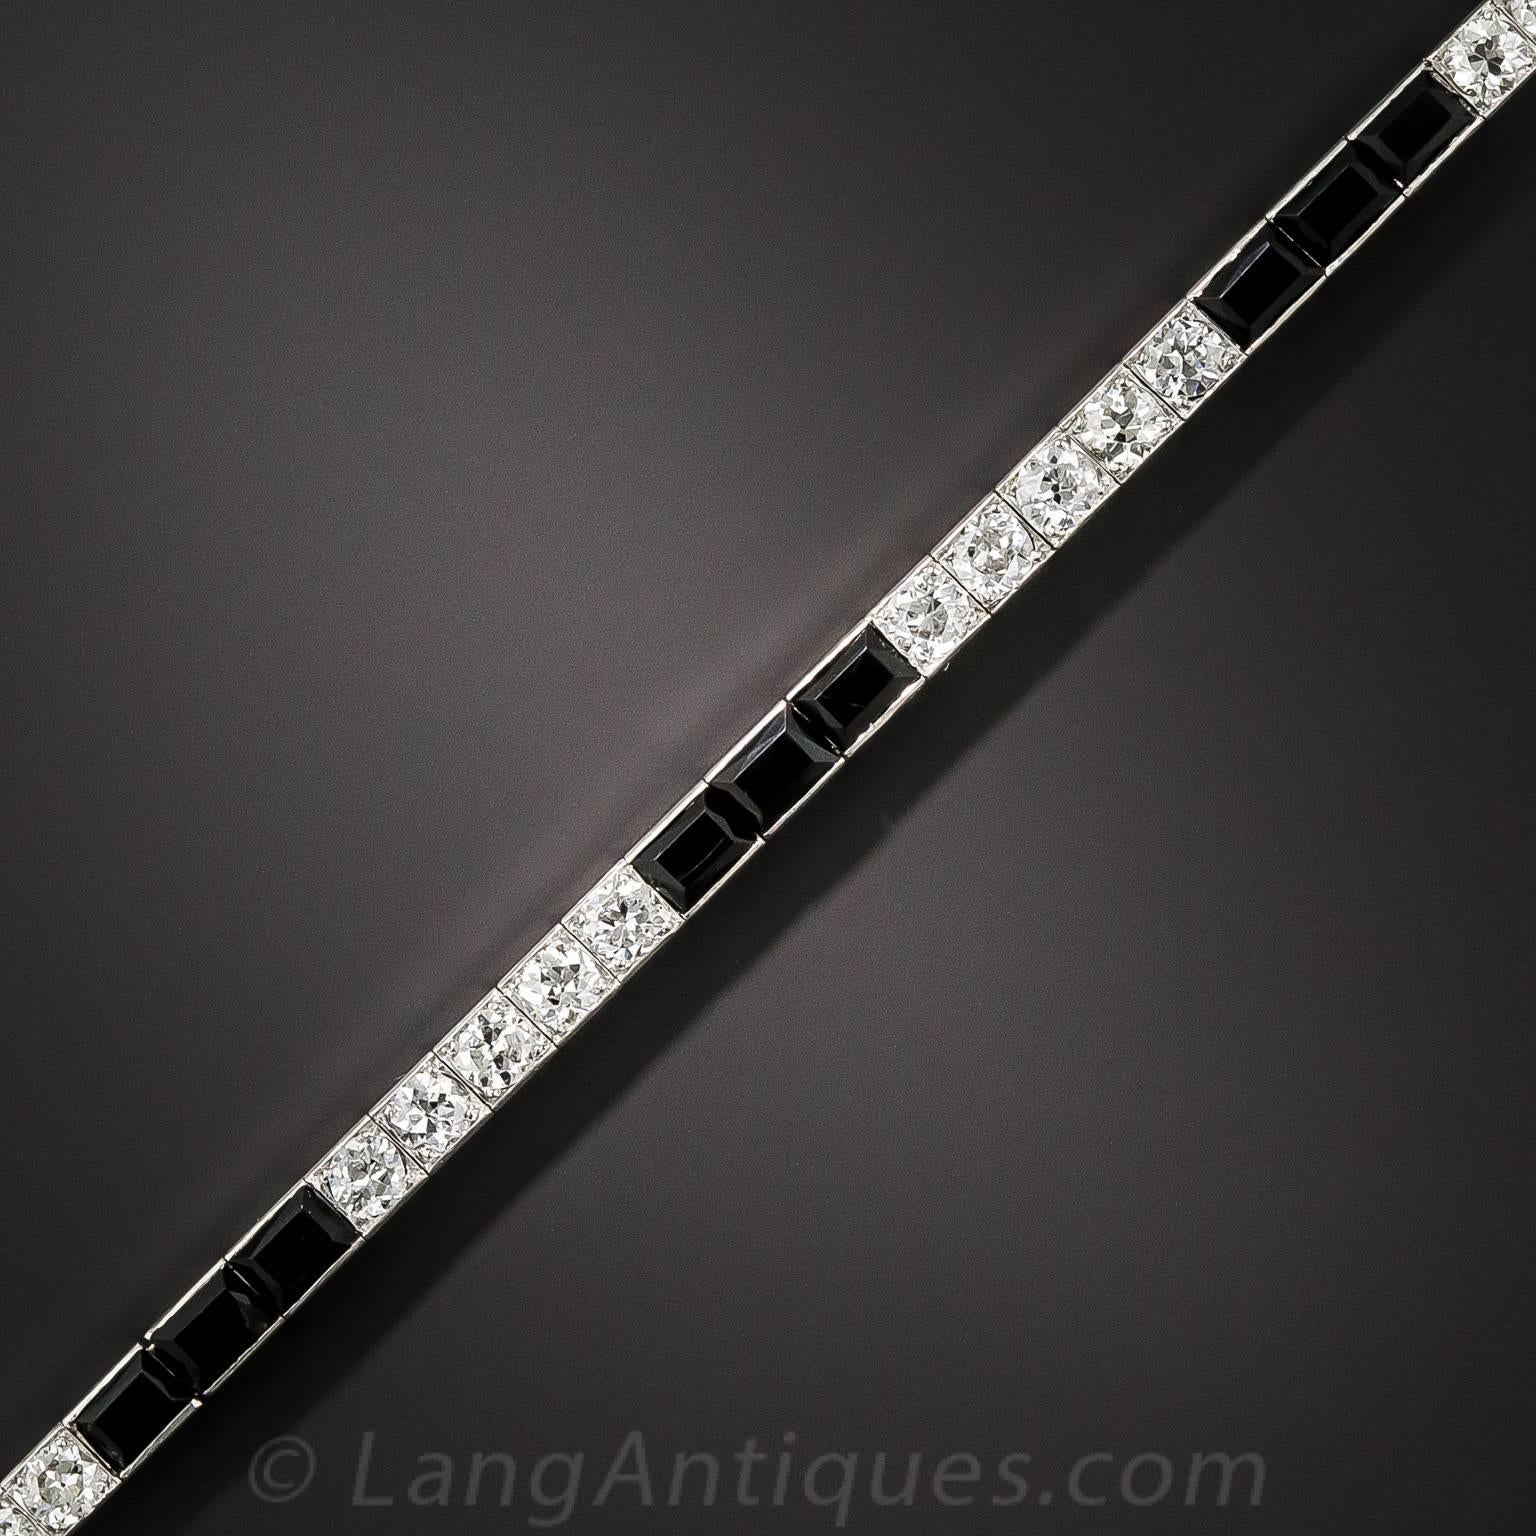 Hand-fabricated in platinum, in glorious black & white, during the peak of the Art Deco design period - circa 1925 - comes this sleek and sophisticated classic from Cartier. Sections of four bright, white European-cut diamond sparklers, totaling